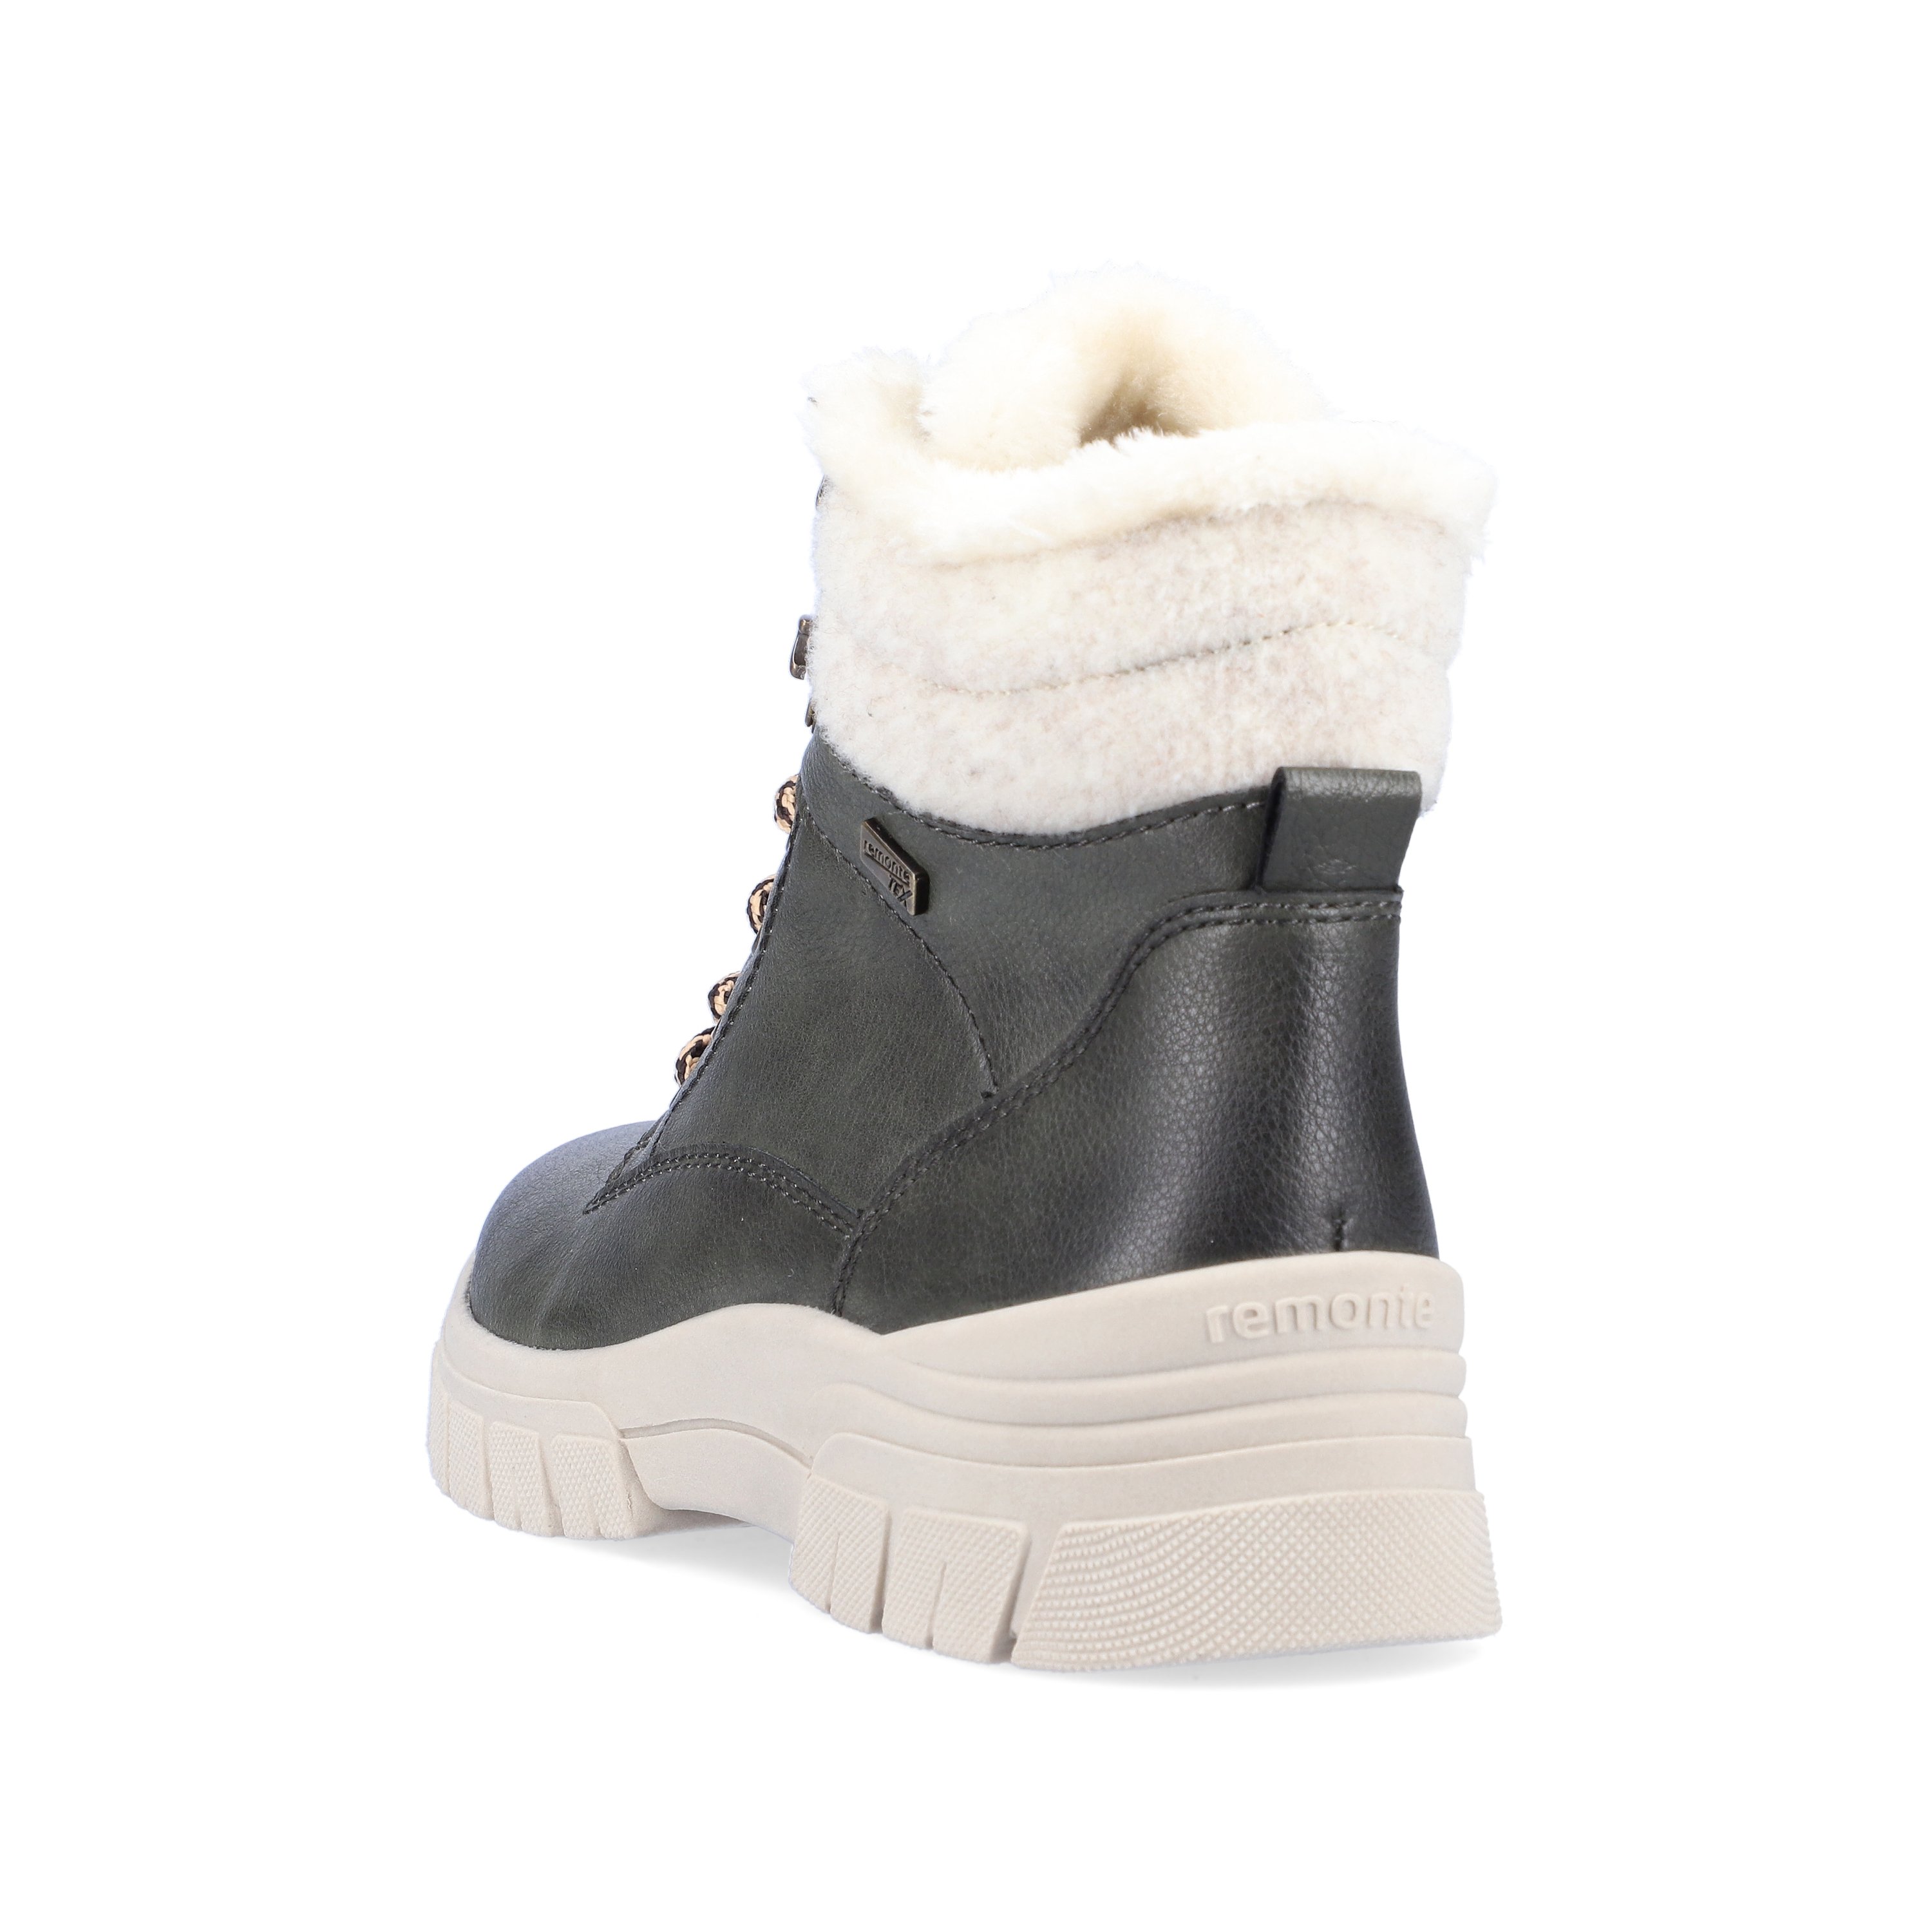 Green-grey remonte women´s lace-up boots D0E71-52 with light profile sole. Shoe from the back